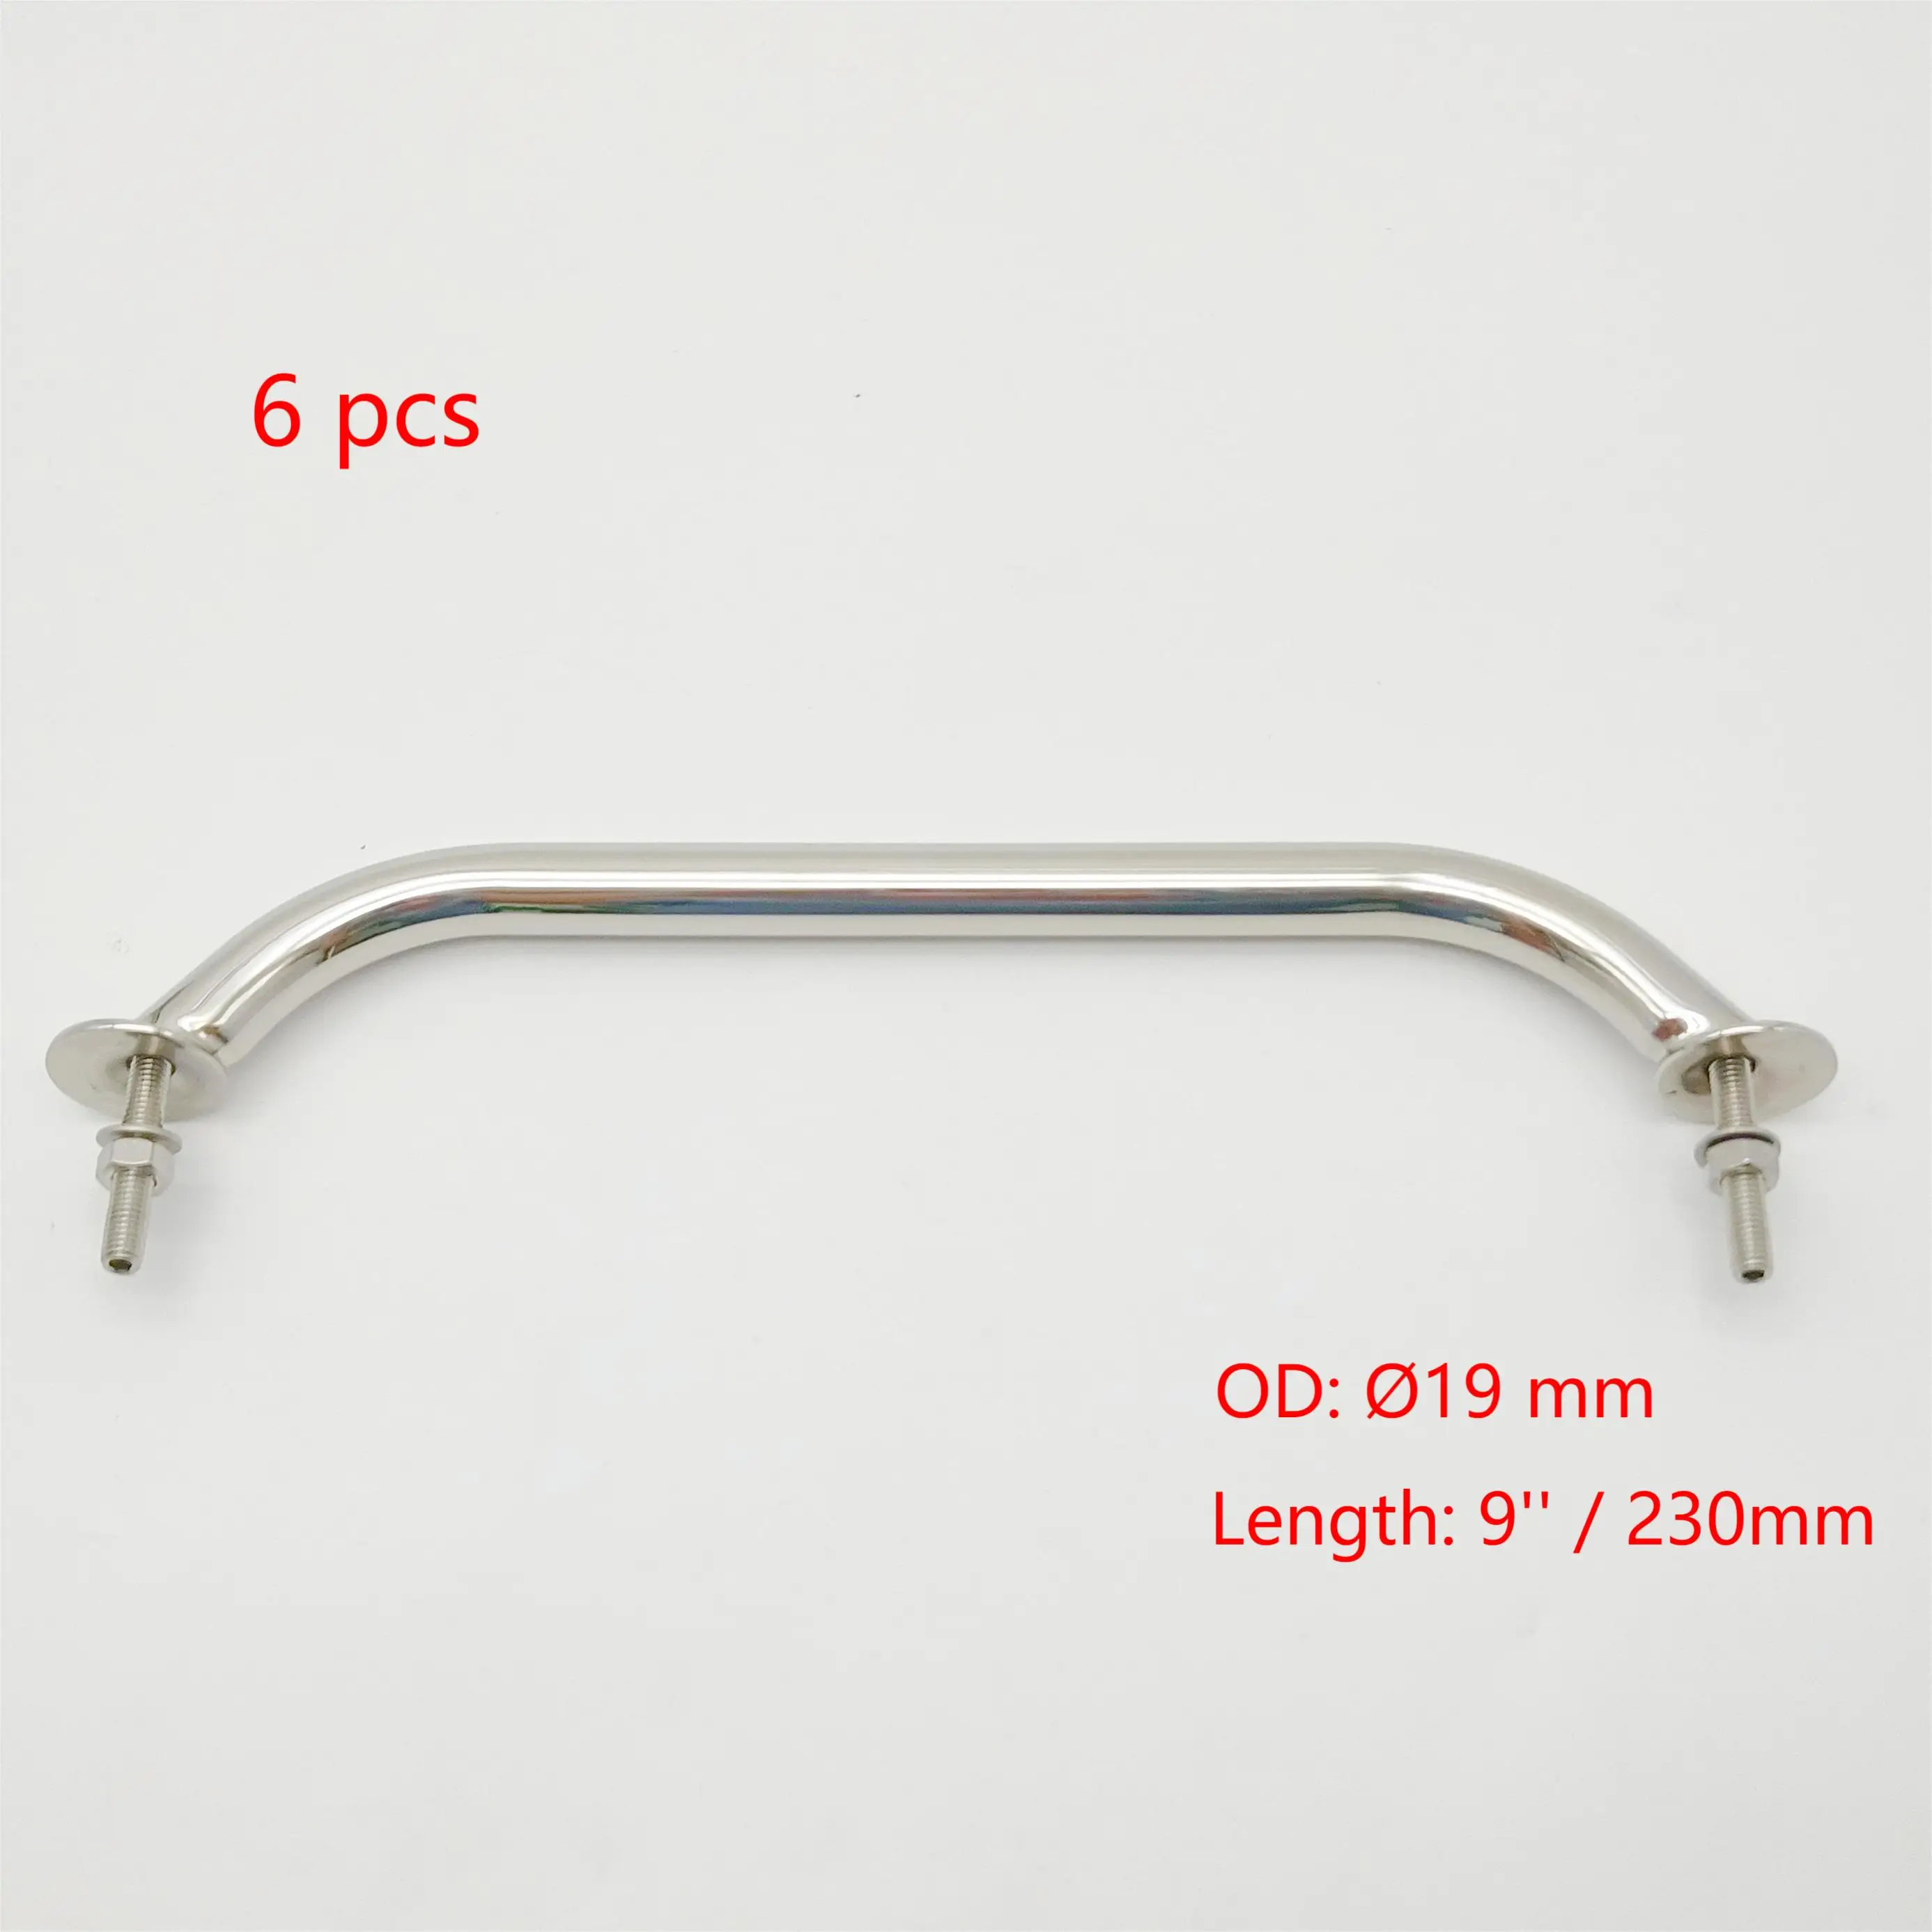 6 PCS 230mm (9 inch) Grab Rail Handle 316 Stainless Steel Boat Handrail Handle Mirror Polished